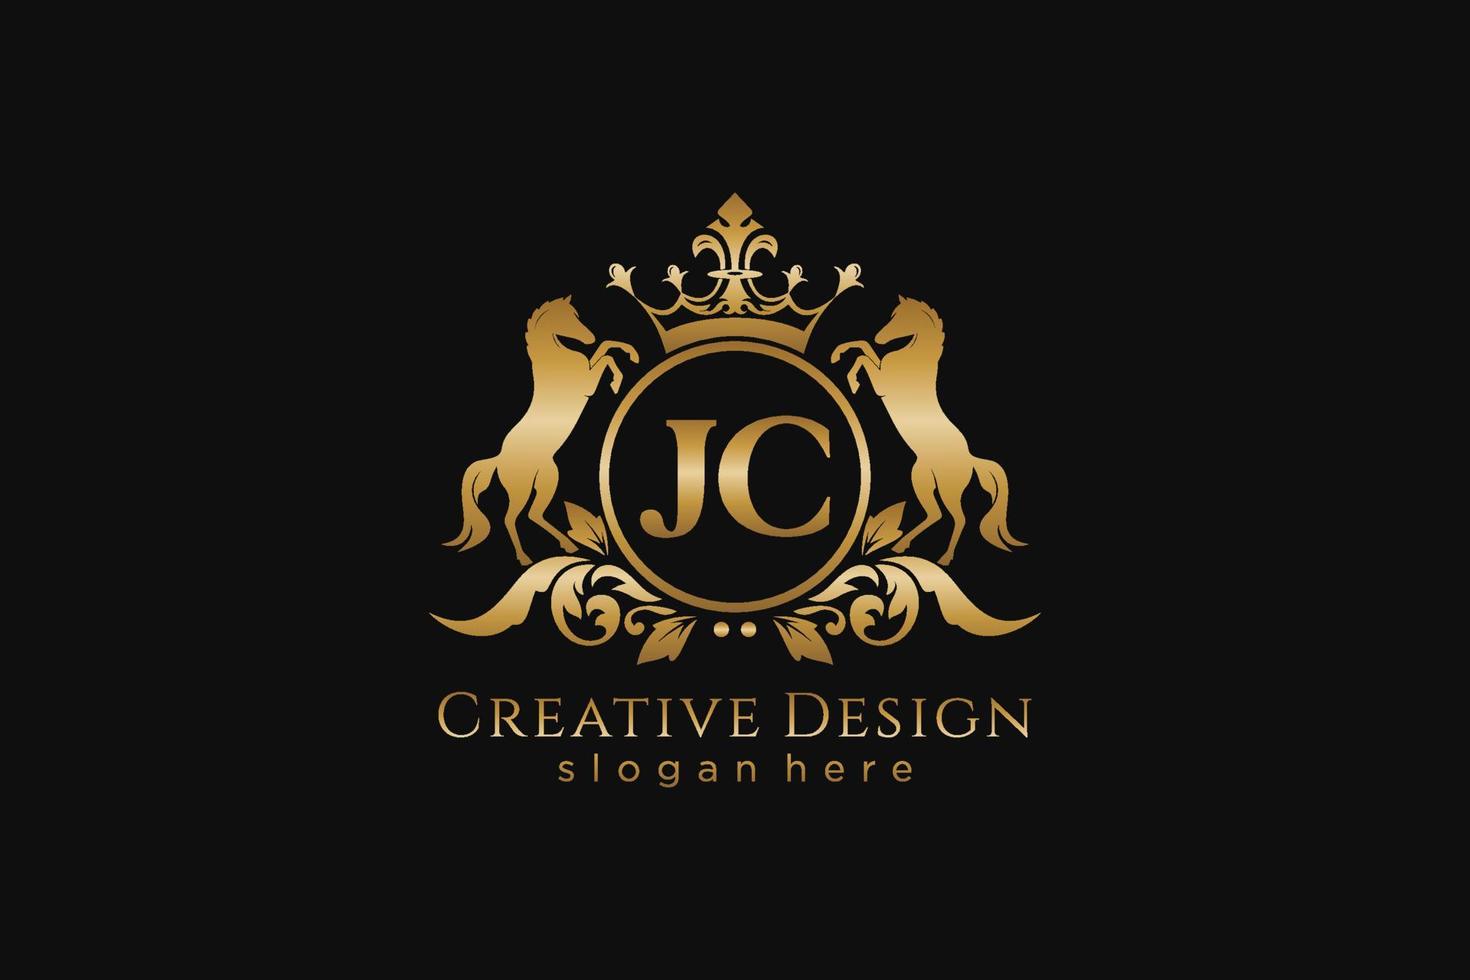 initial JC Retro golden crest with circle and two horses, badge template with scrolls and royal crown - perfect for luxurious branding projects vector